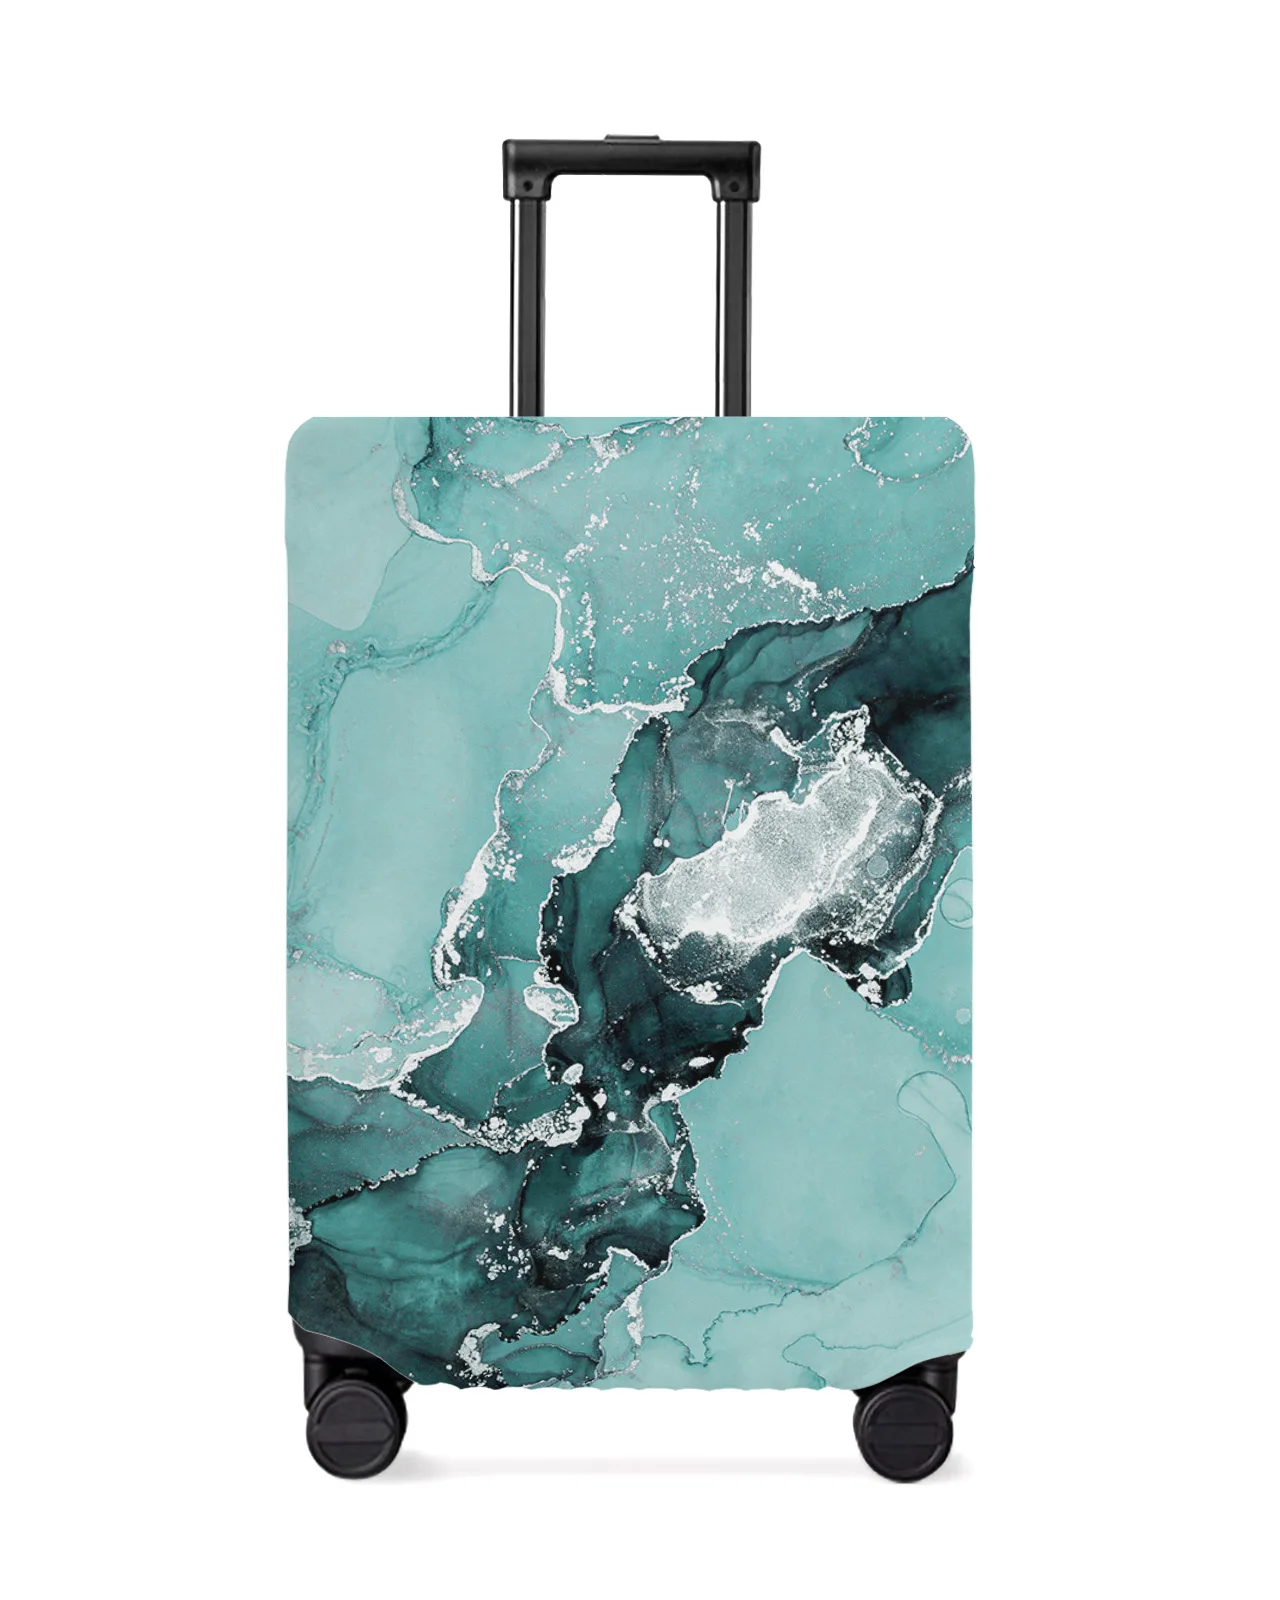 marble-texture-ink-green-travel-luggage-cover-elastic-baggage-cover-for-18-32-inch-suitcase-case-dust-cover-travel-accessories